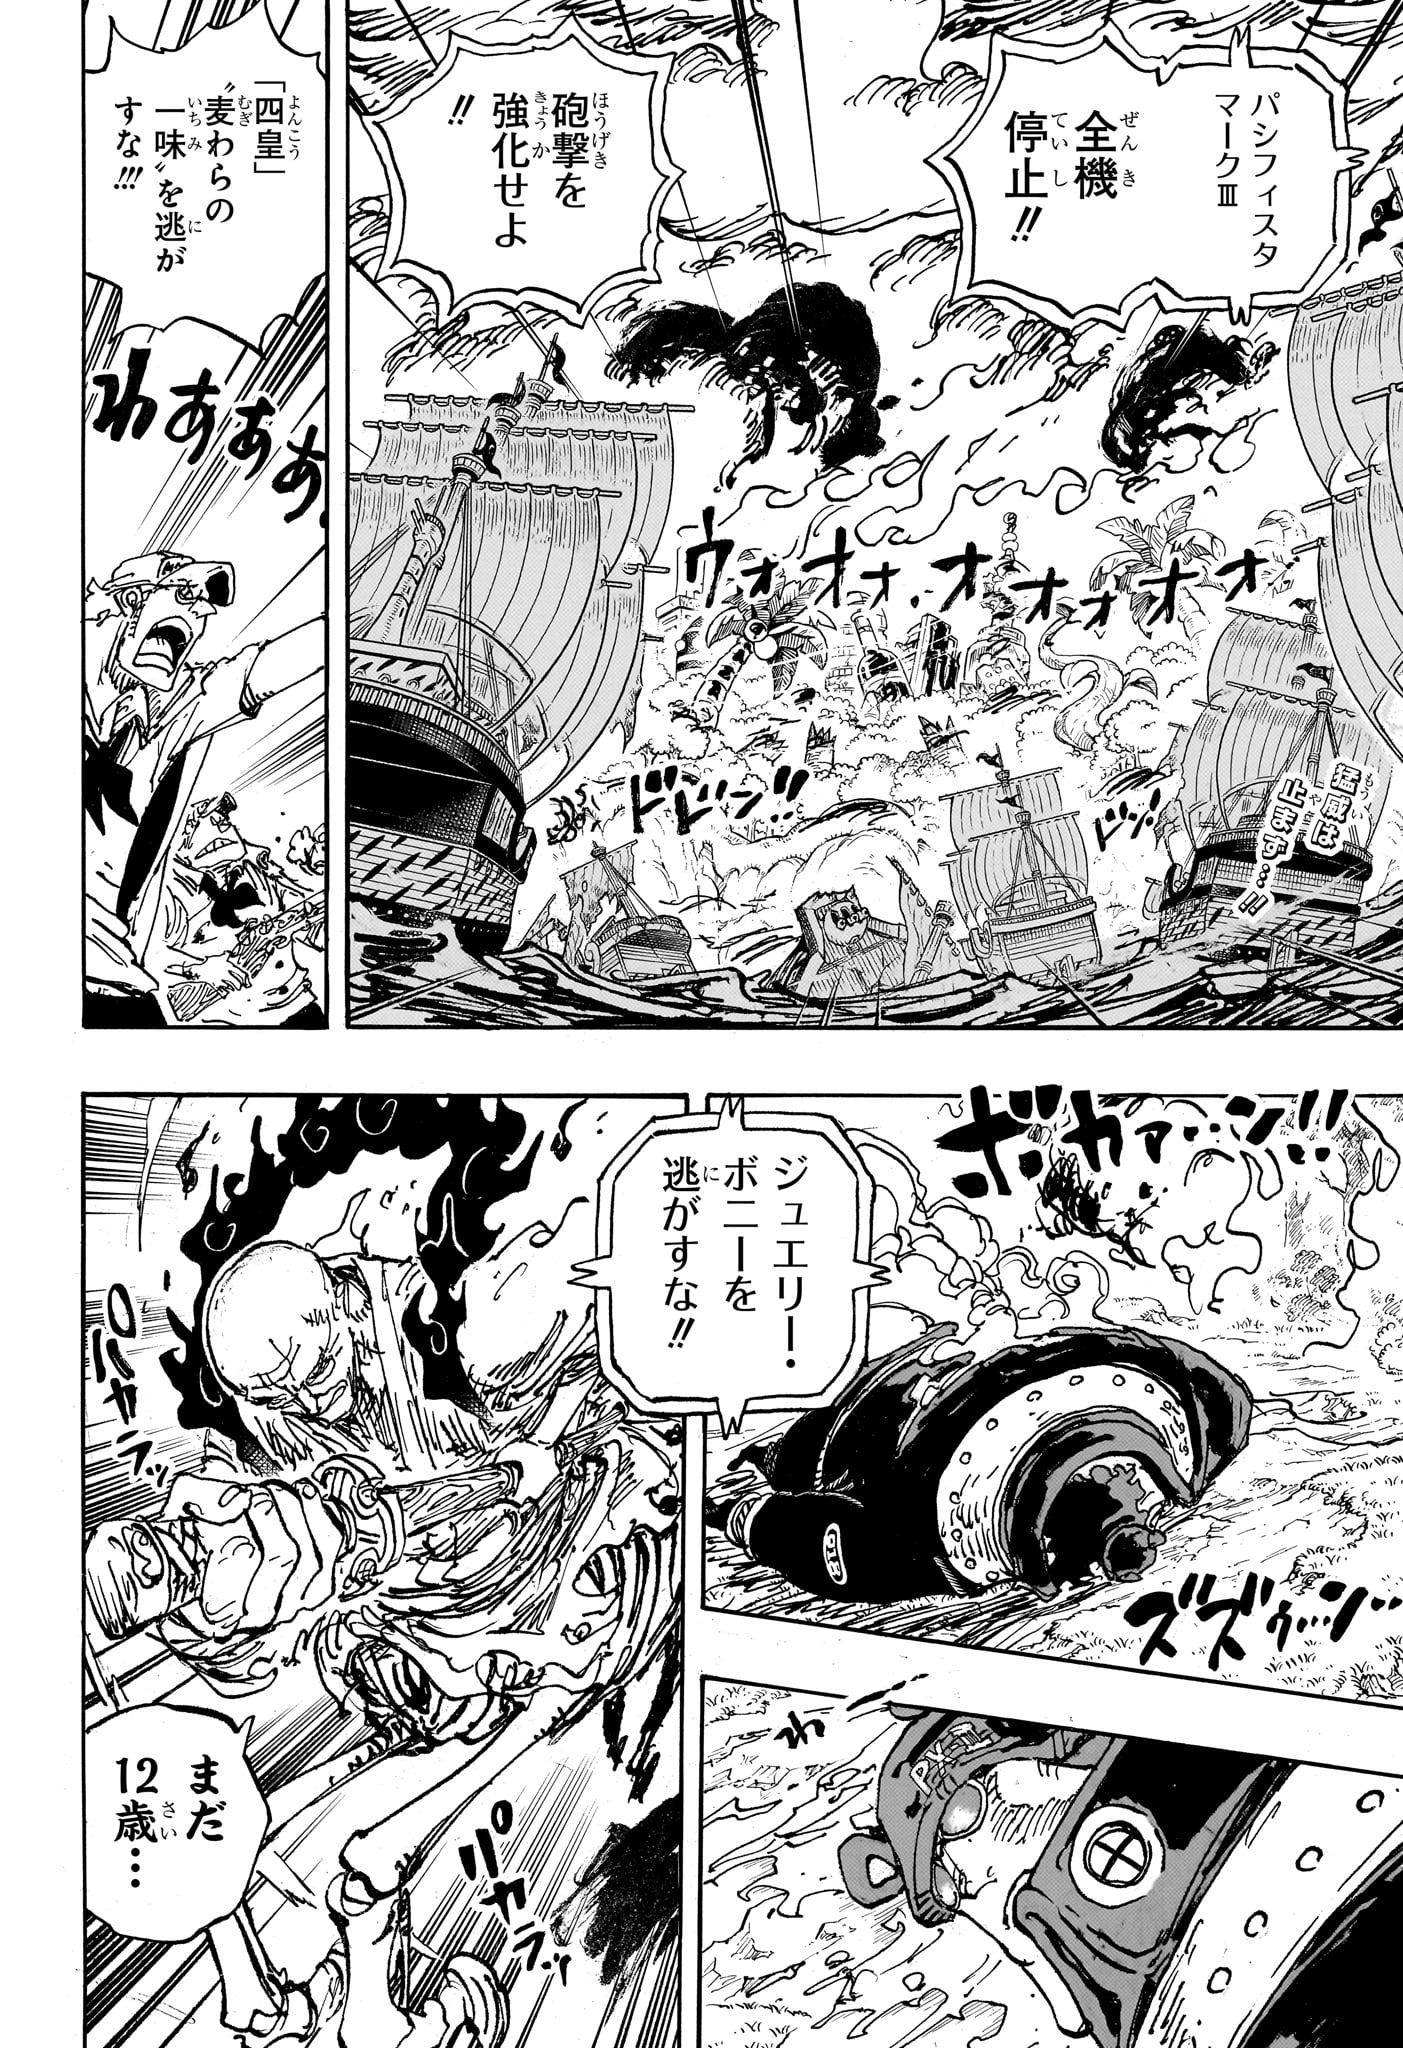 One Piece - Chapter 1112 - Page 2